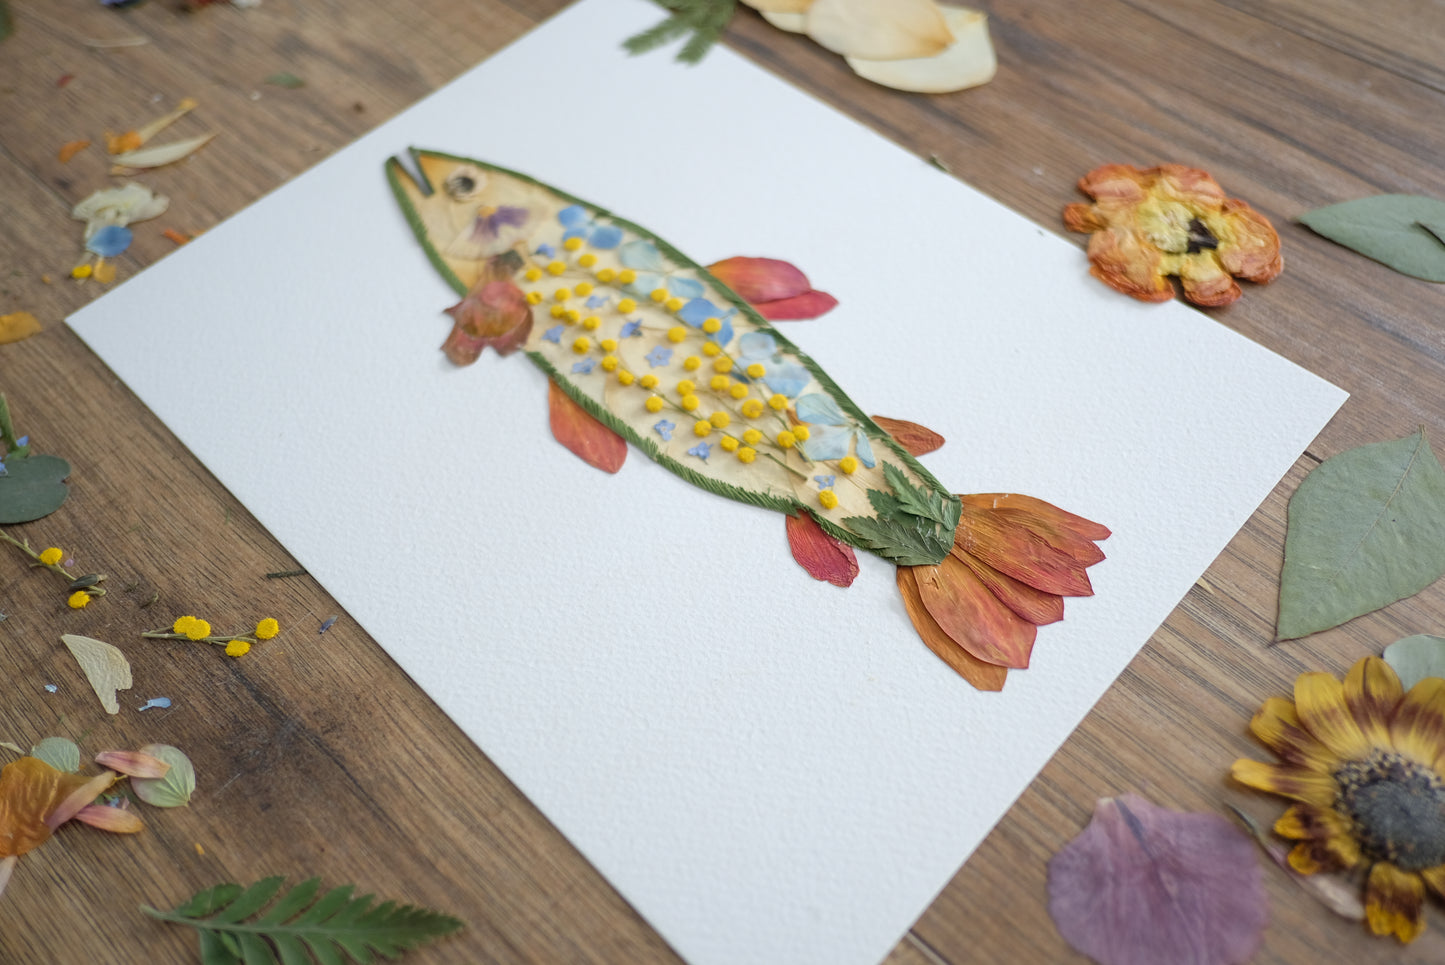 Pretty Trout Fish Artwork made with orange, blue, yellow flowers and greenery.